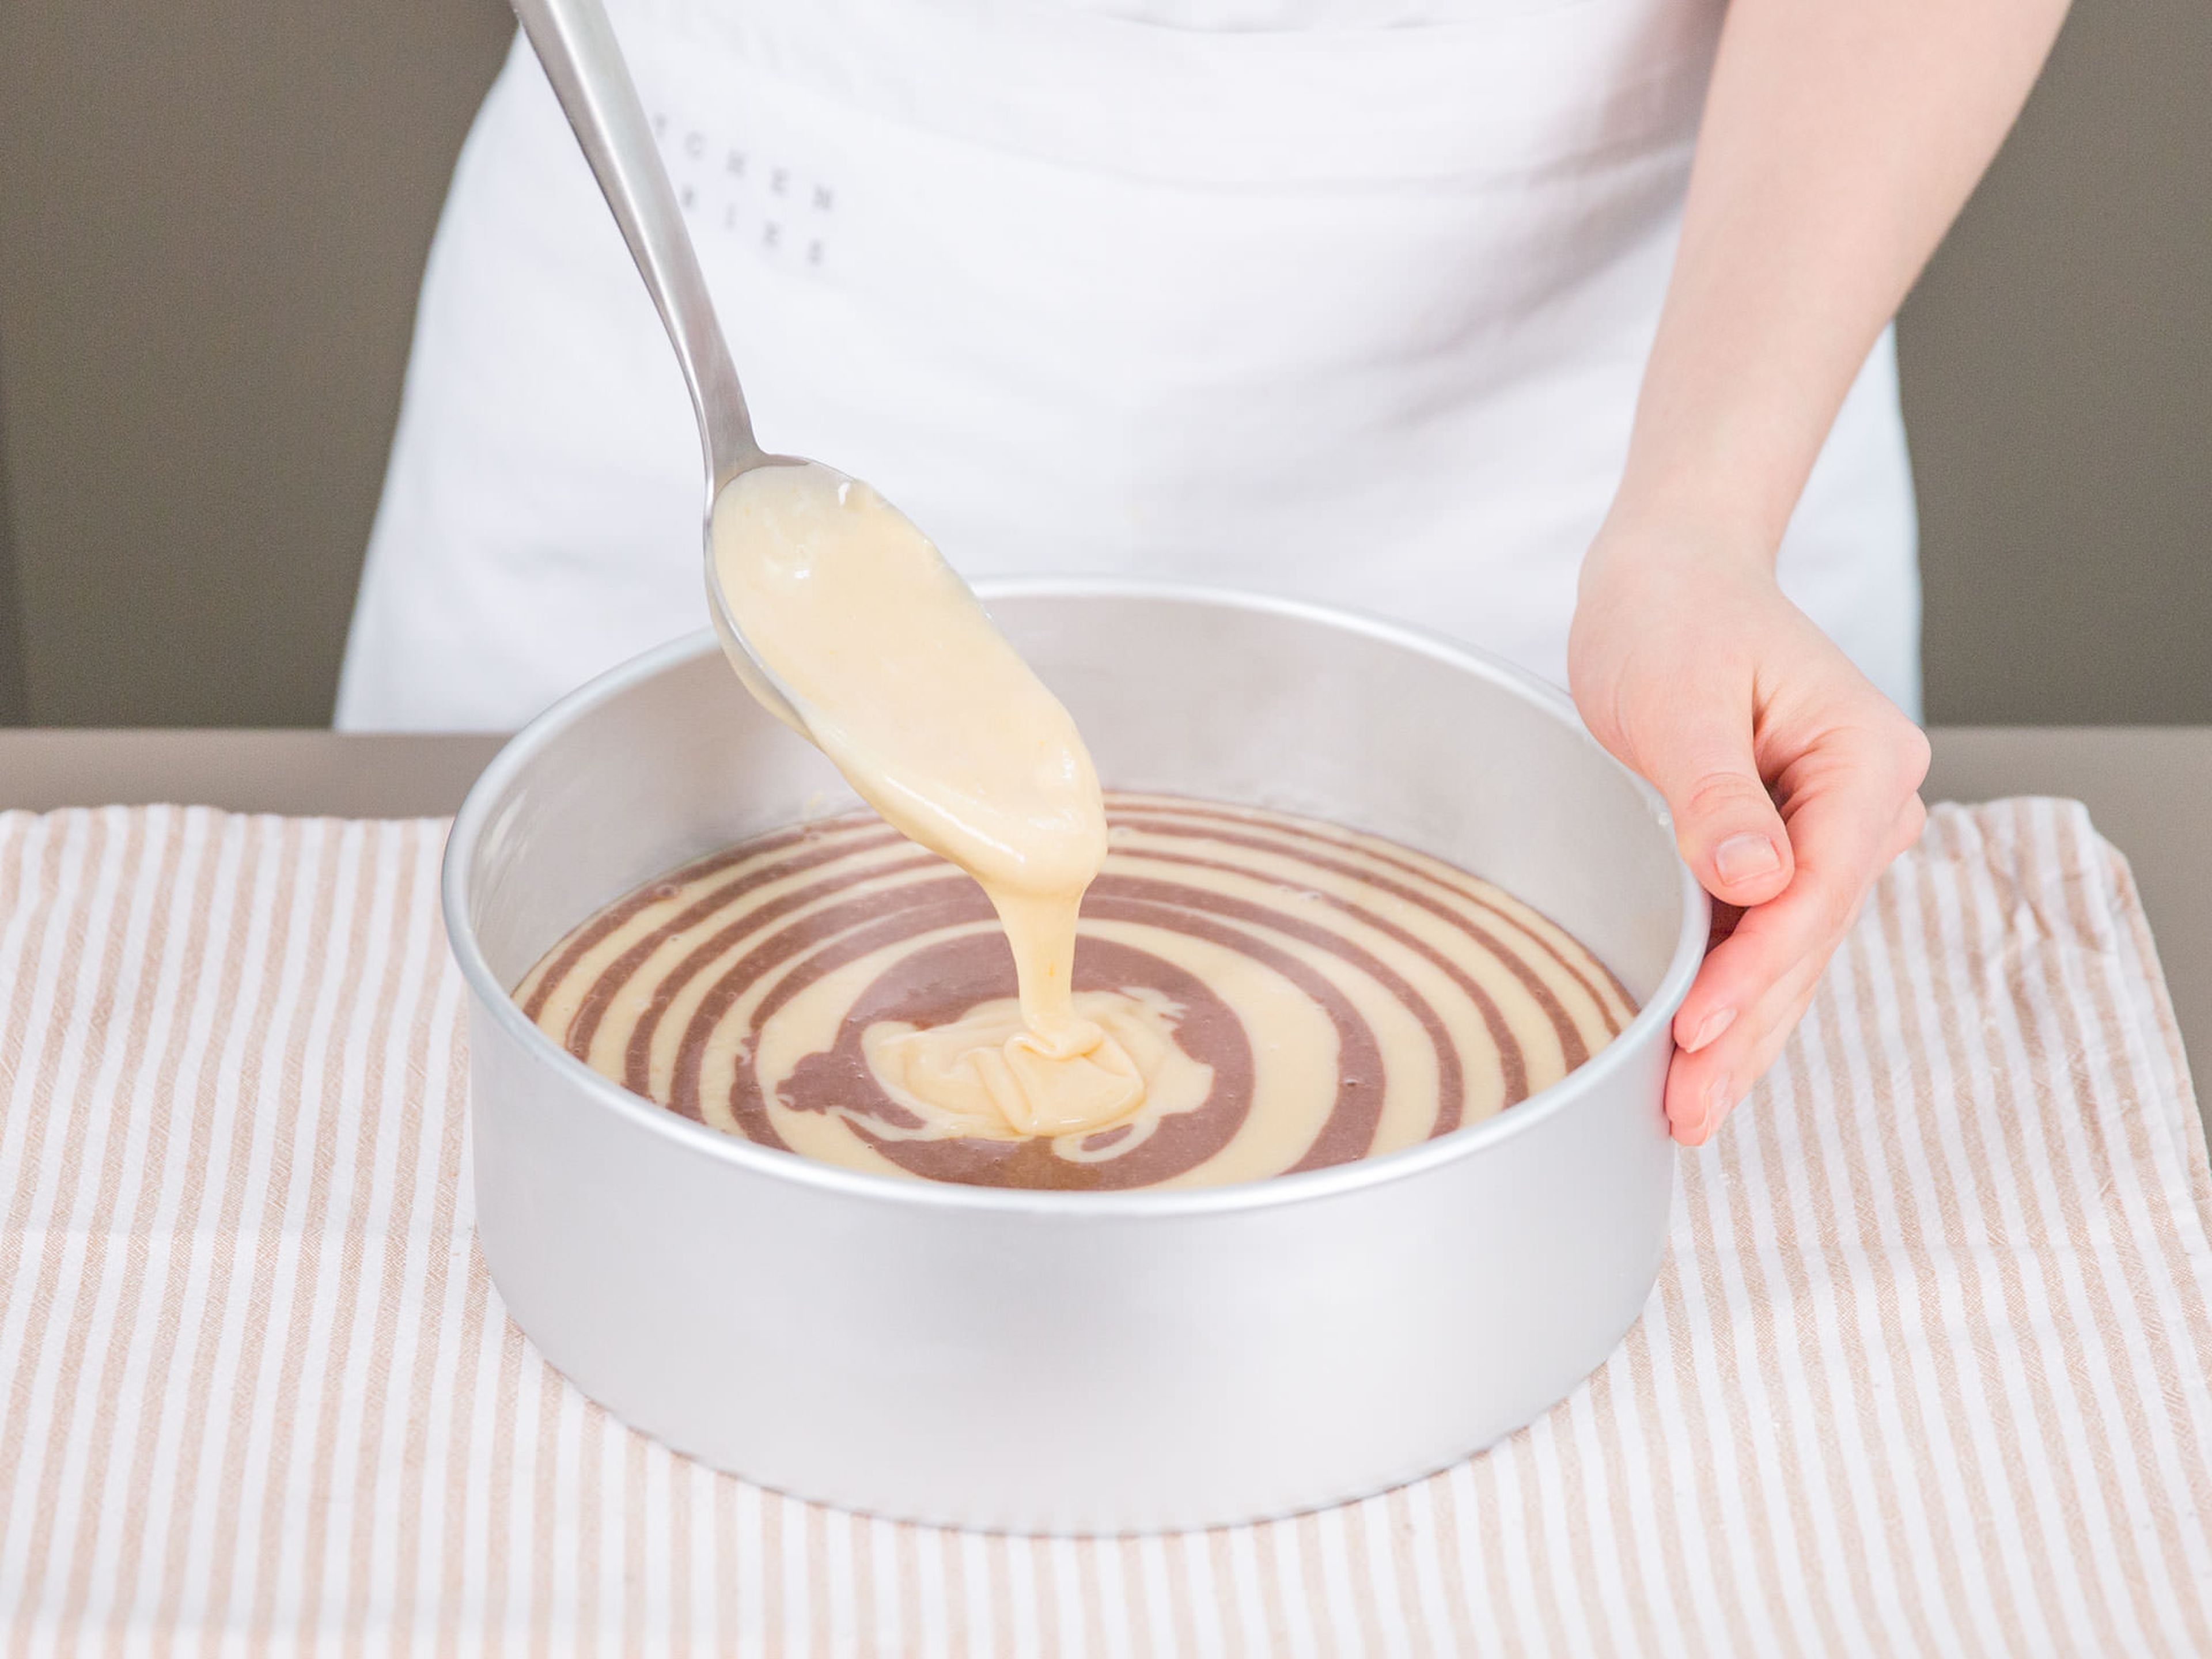 Transfer approx. half of batter to chocolate mixture and stir until combined and uniform. To create stripes, first spoon about 2 tablespoons of vanilla batter into center of cake pan. With a clean spoon, scoop same amount of chocolate batter directly onto center of vanilla batter. Continue alternating batters in this way until all of it is used. Bake for approx. 35 – 40  min., or until toothpick inserted into center of cake comes out clean. Let cake cool for 15 min. before turning out of pan. Let cool completely on cooling rack.